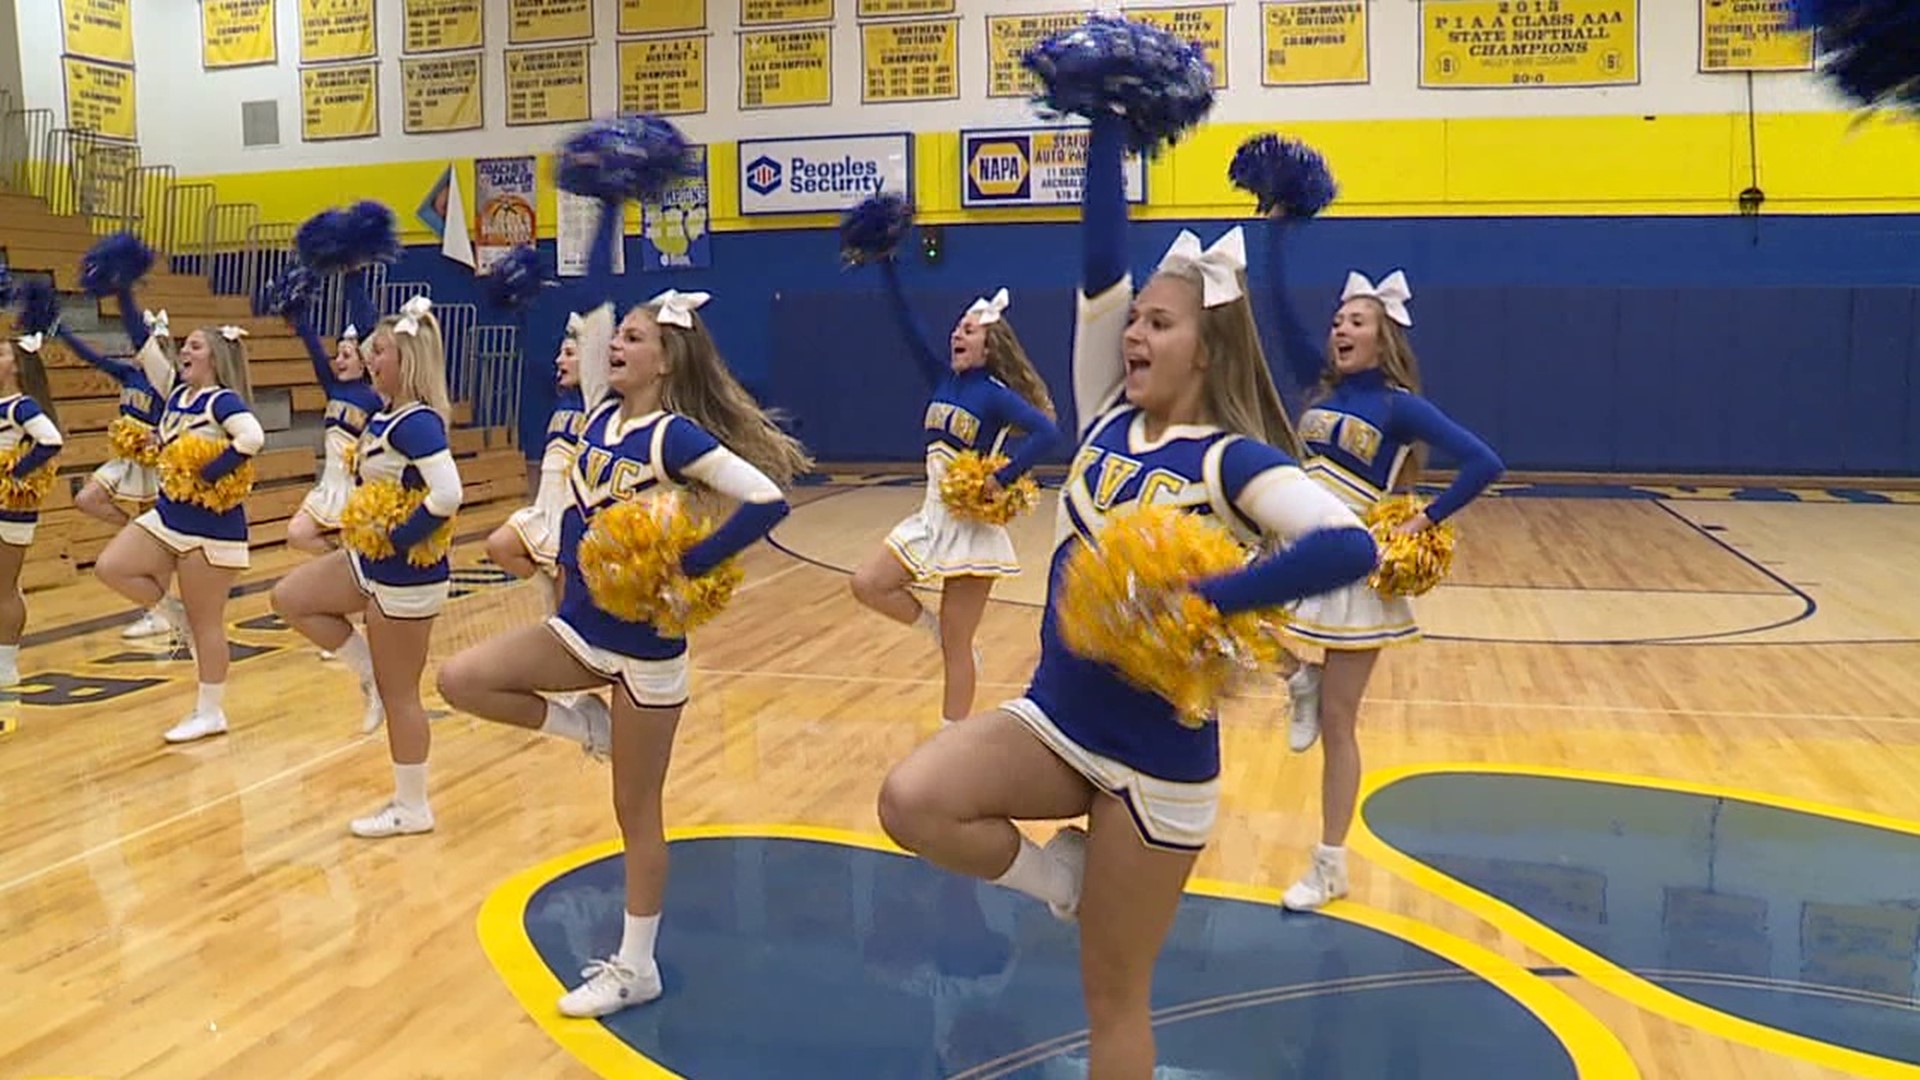 Newswatch 16 rallied members of the Valley View student body to show off their game day faces early Friday morning.